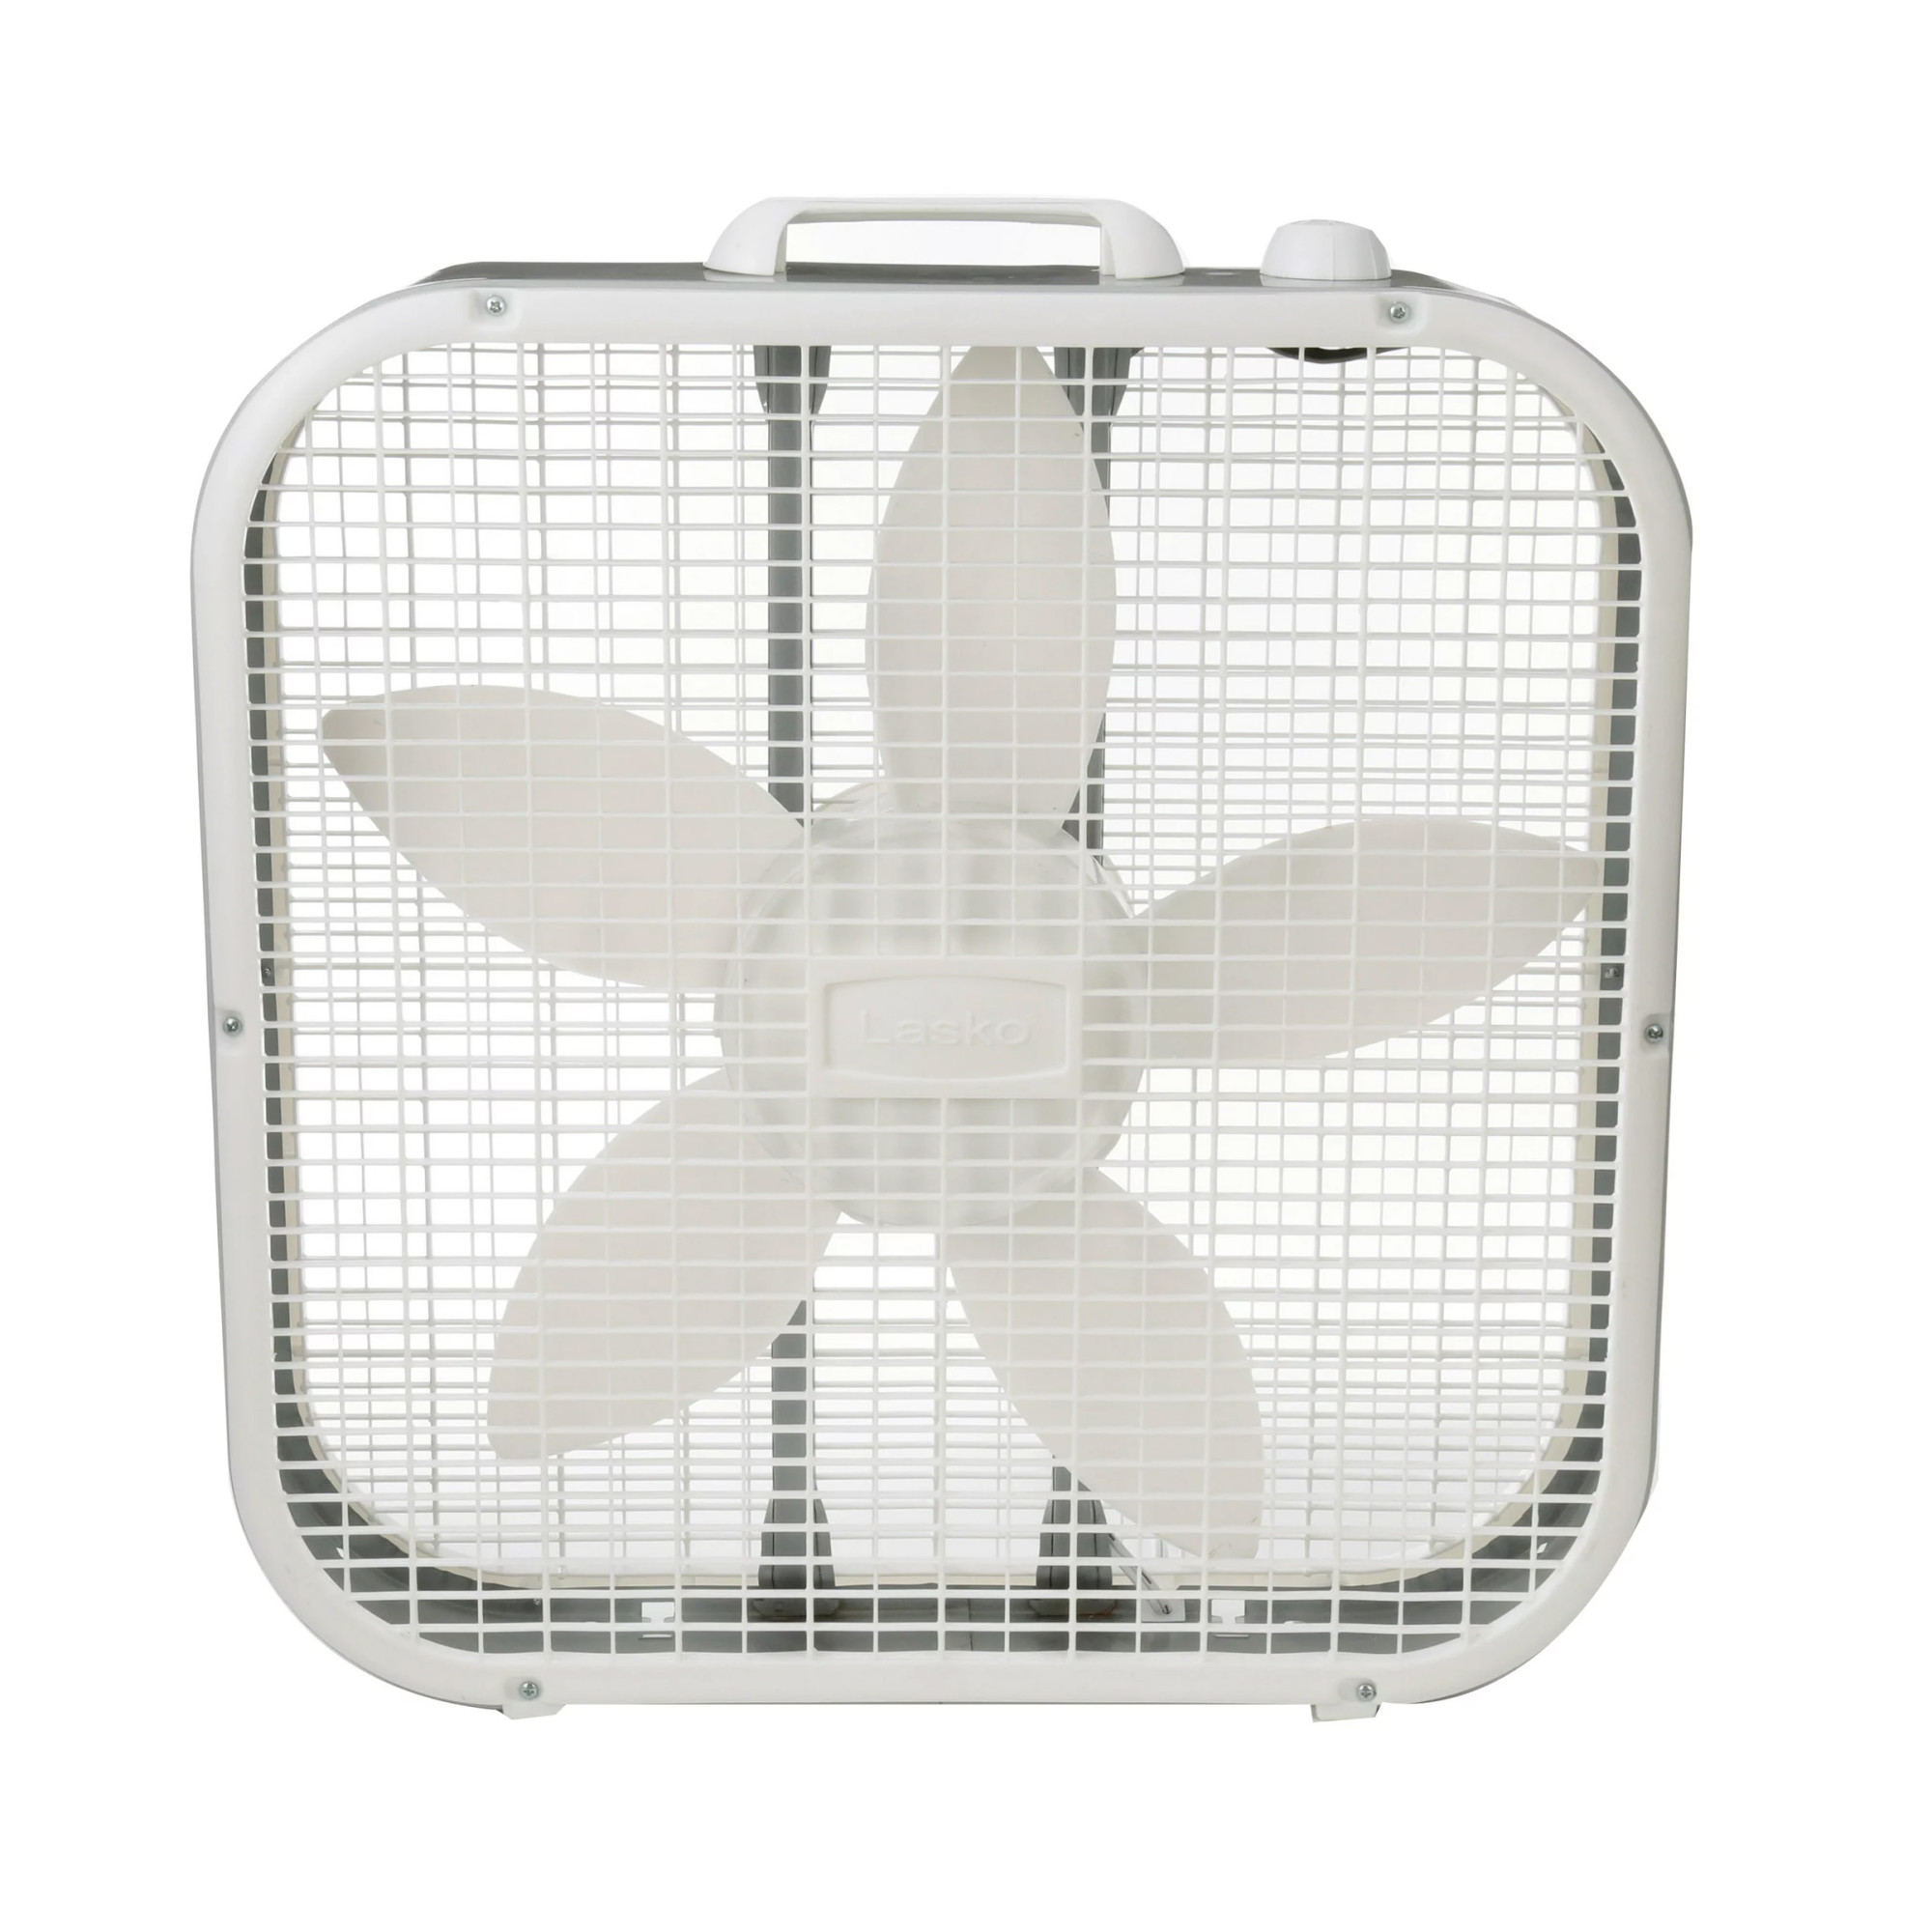 Lasko 20" Classic Box Fan with Weather-Resistant Motor, 3 Speeds, 22.5" H, White, B20200, New - image 2 of 6